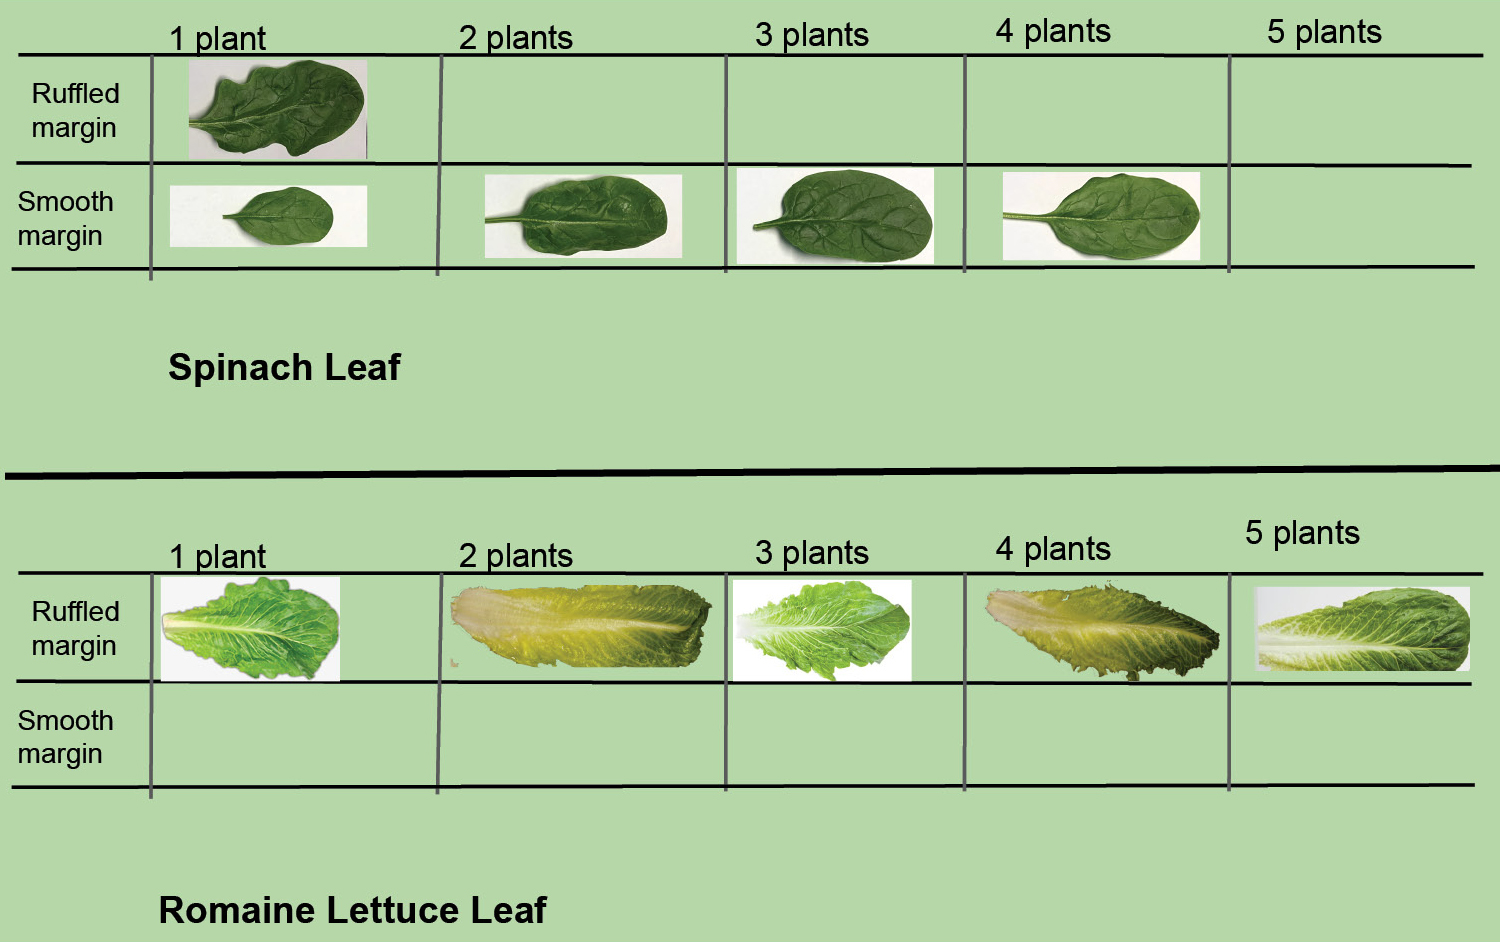 Comparing spinach and lettuce leaves.